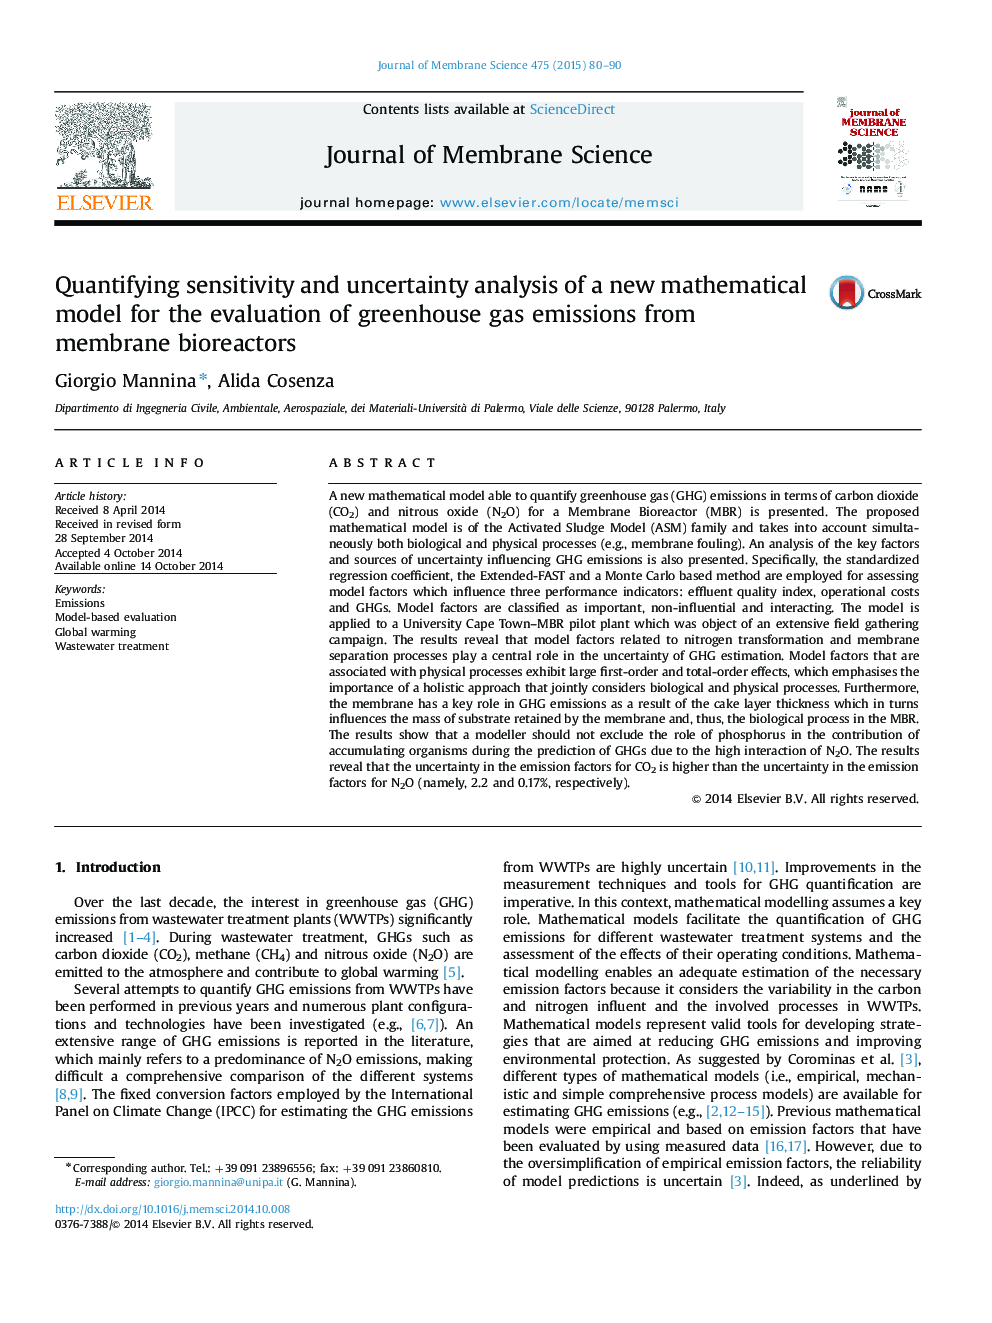 Quantifying sensitivity and uncertainty analysis of a new mathematical model for the evaluation of greenhouse gas emissions from membrane bioreactors